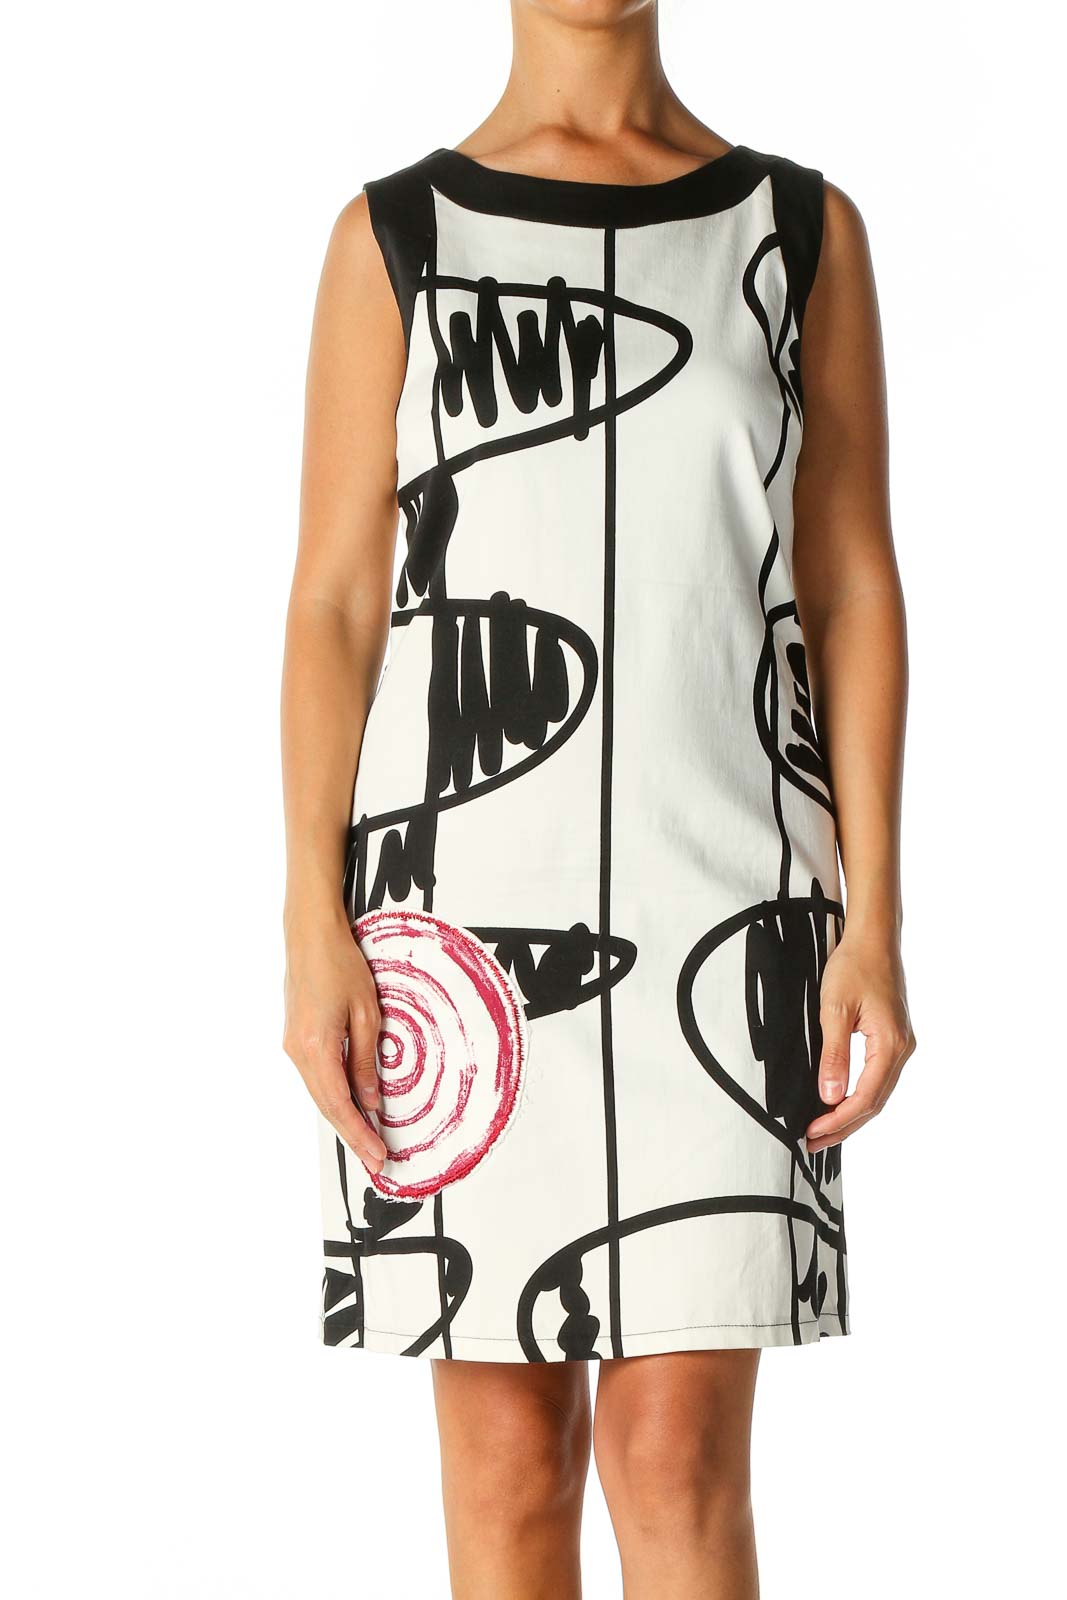 White Graphic Print Casual Shift Dress Front